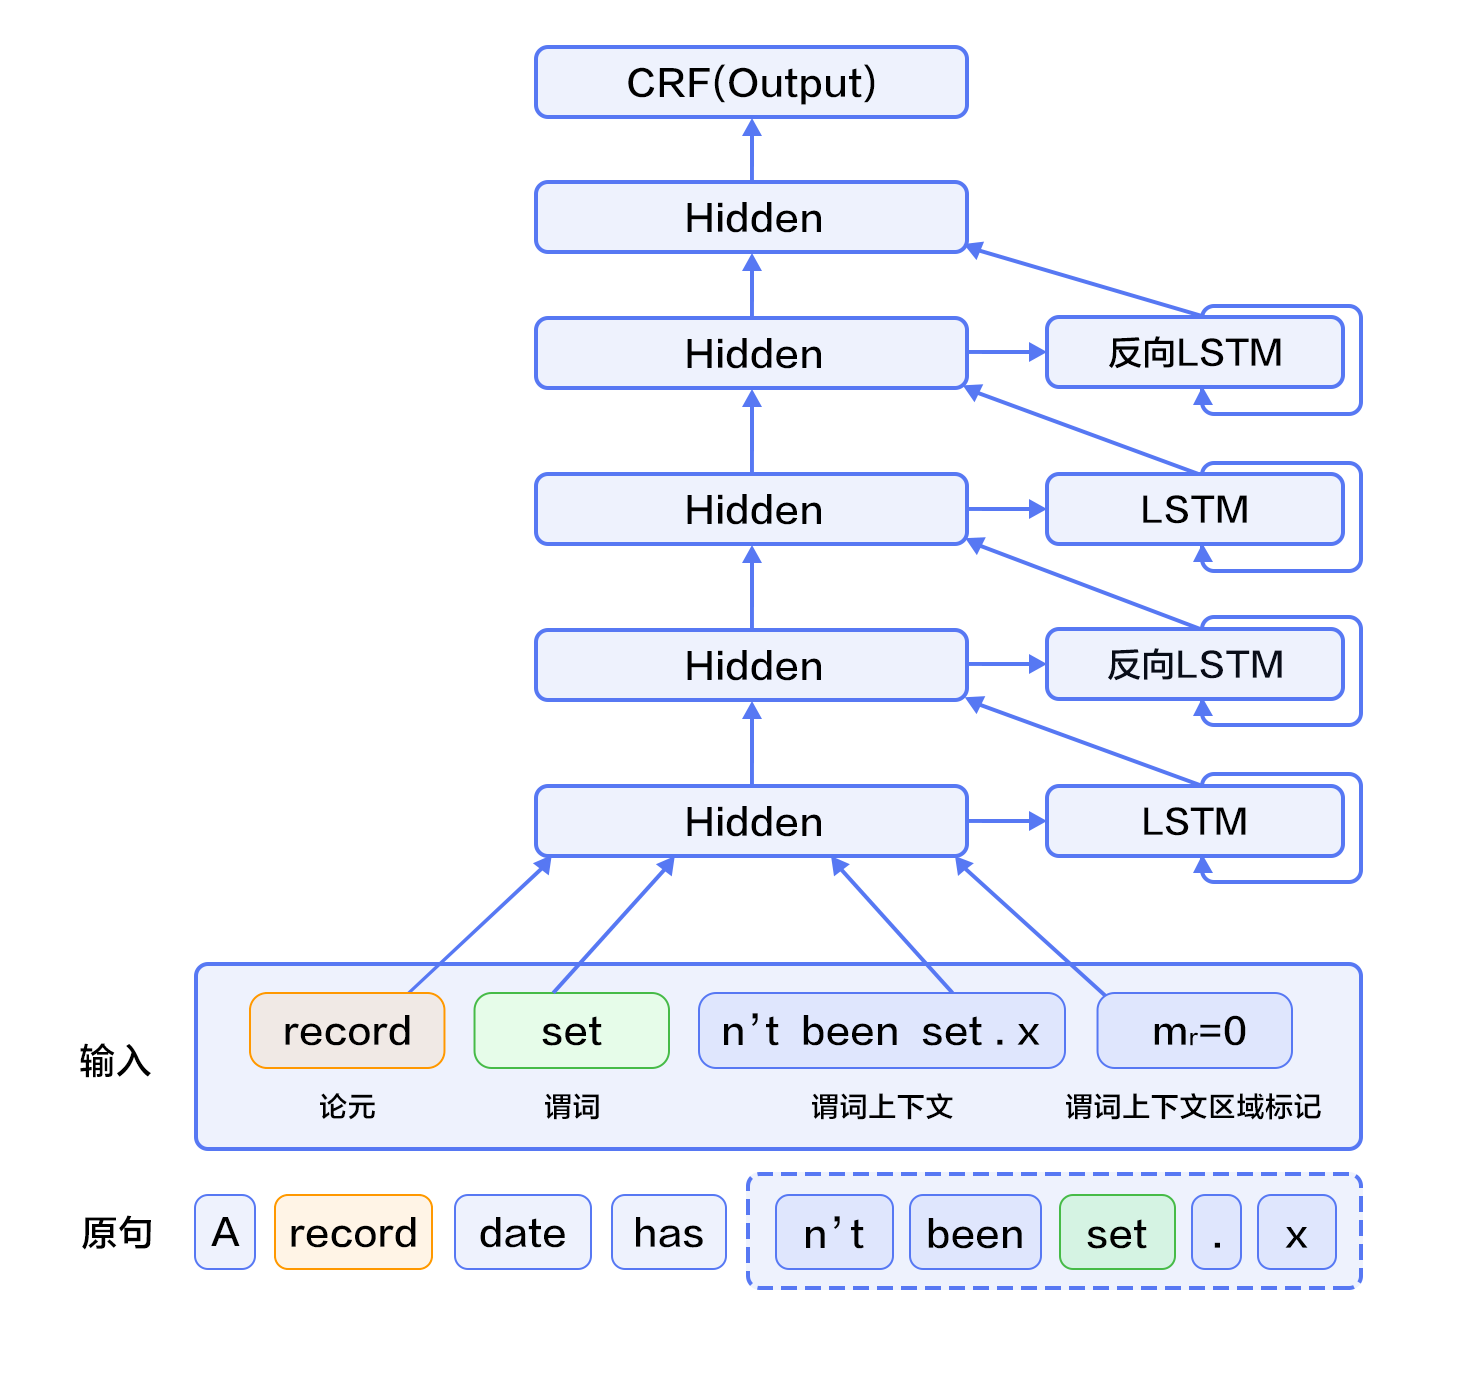 source/beginners_guide/basics/label_semantic_roles/image/db_lstm_network.png